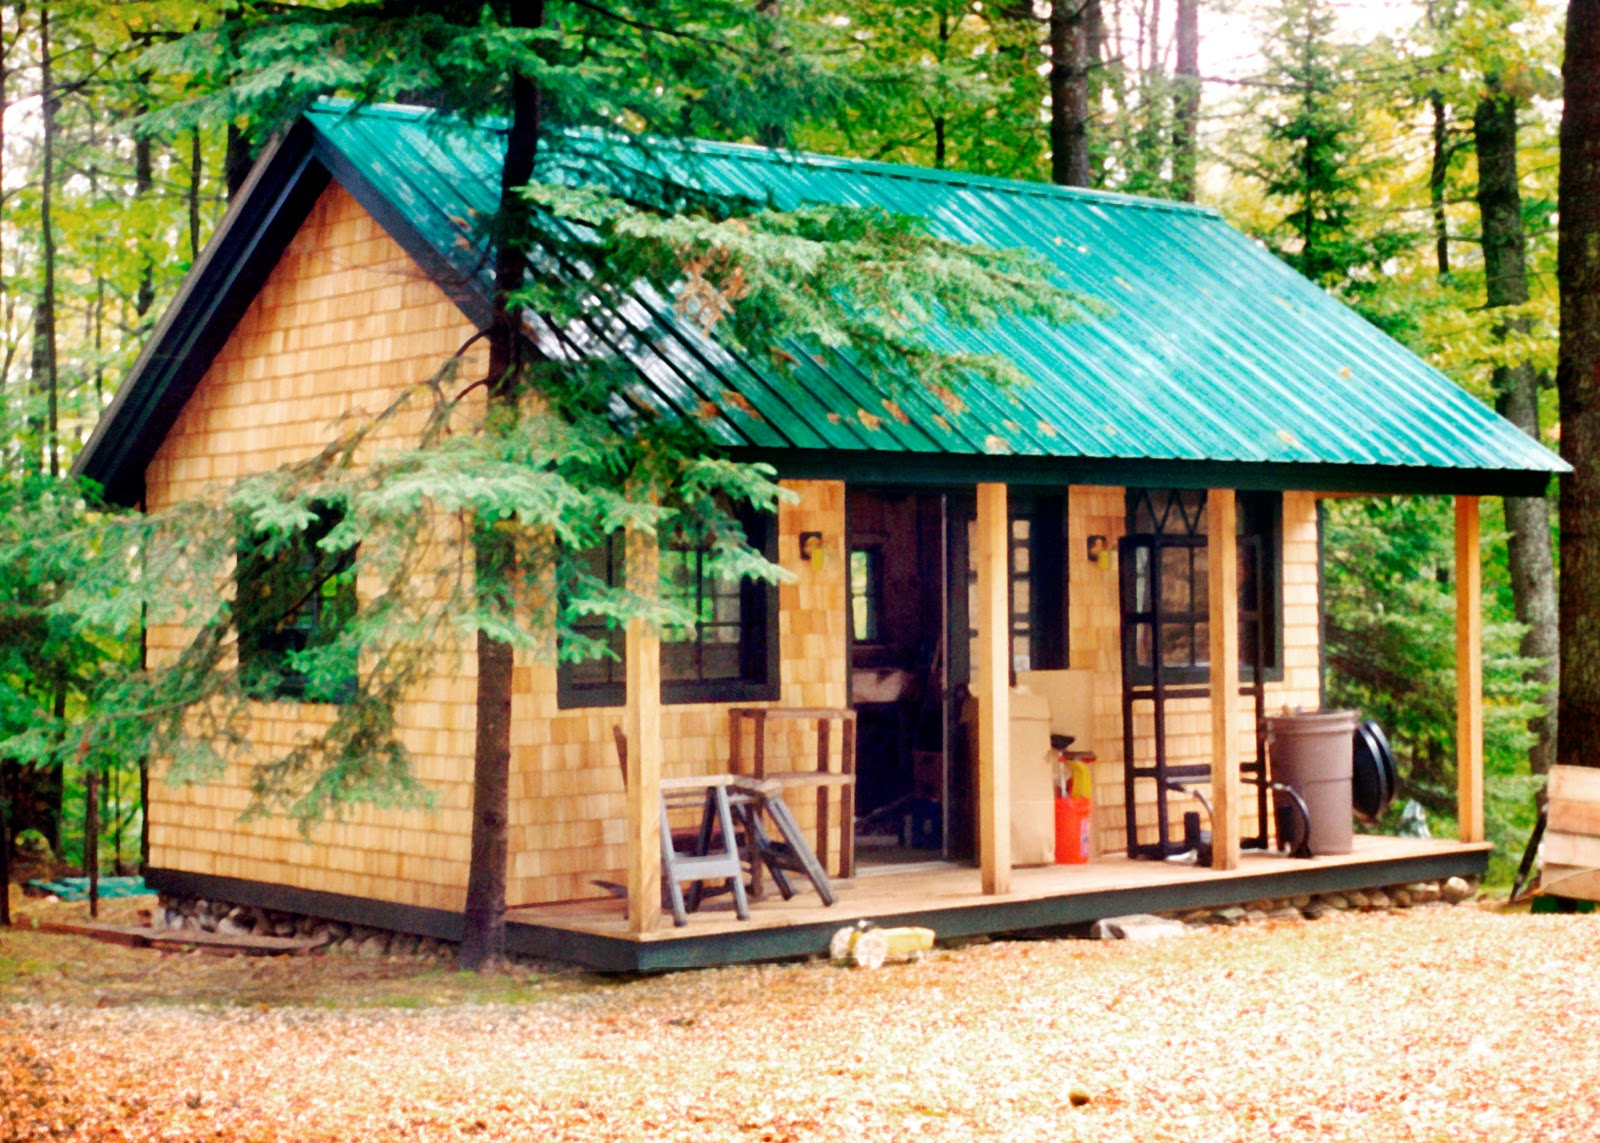  The Jamaica Cottage Shop- TEN AWESOME tiny houses, sheds, n' cabins